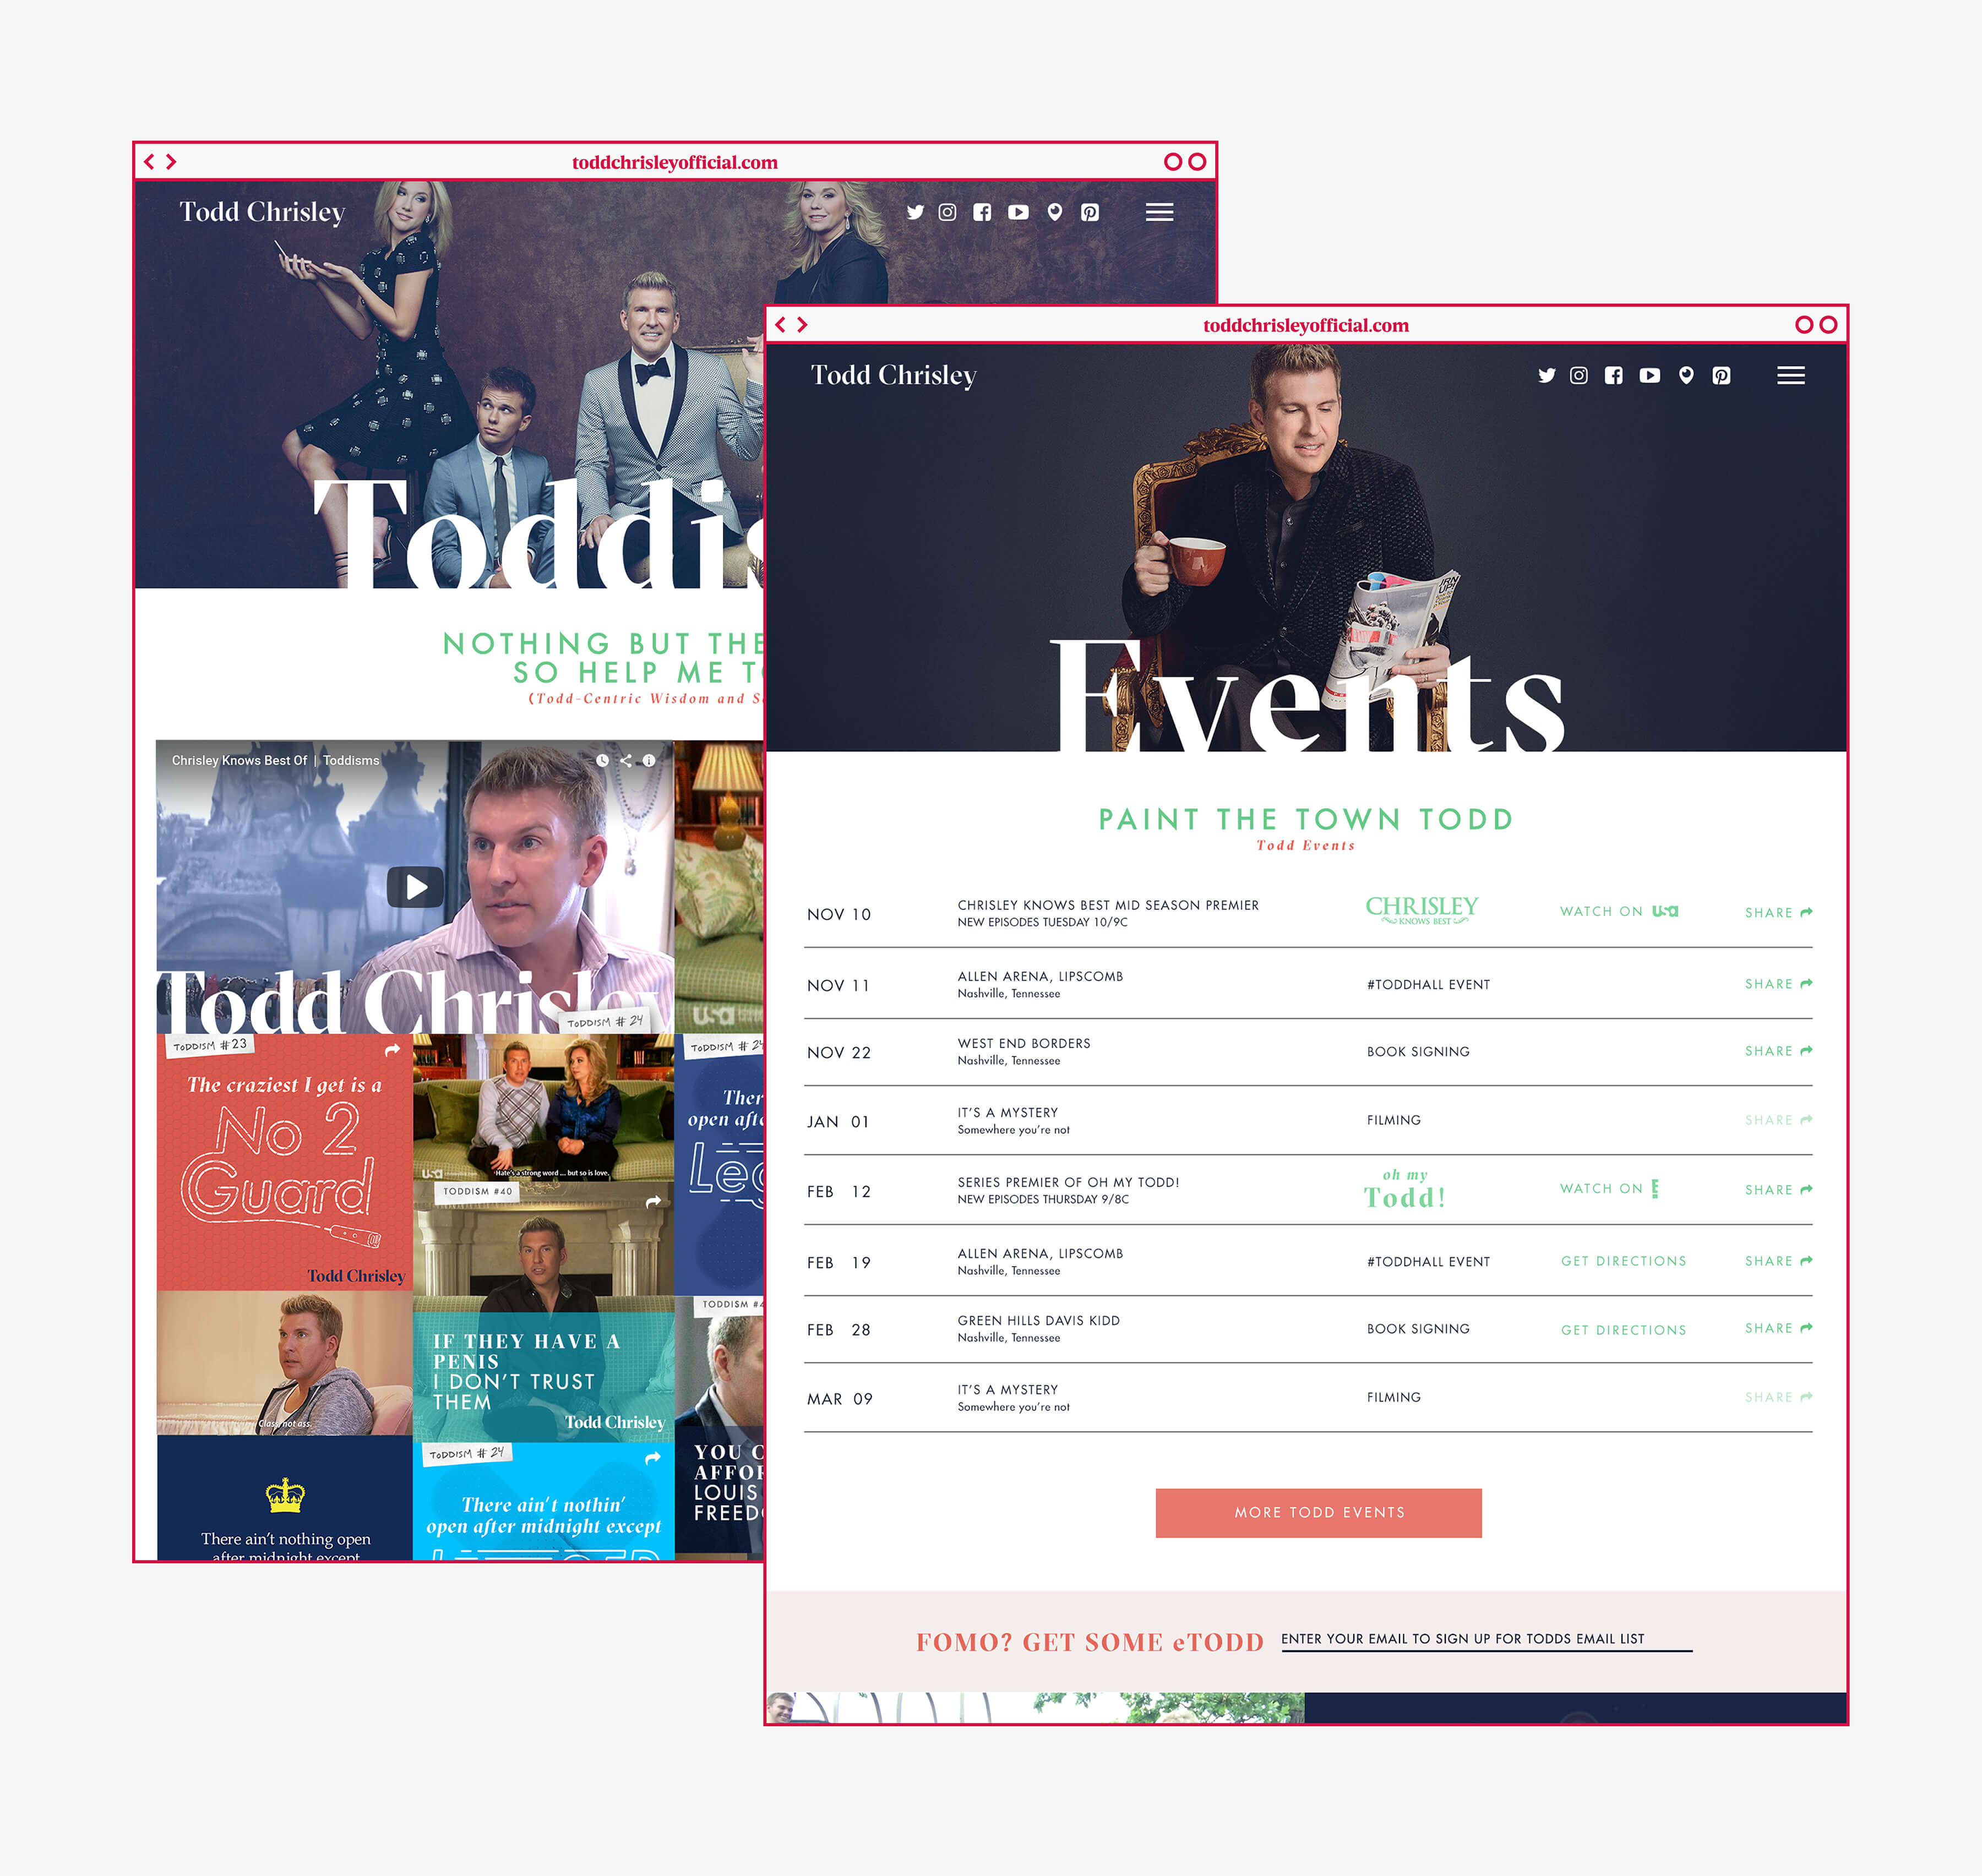 Events listing and Toddism web page design examples.